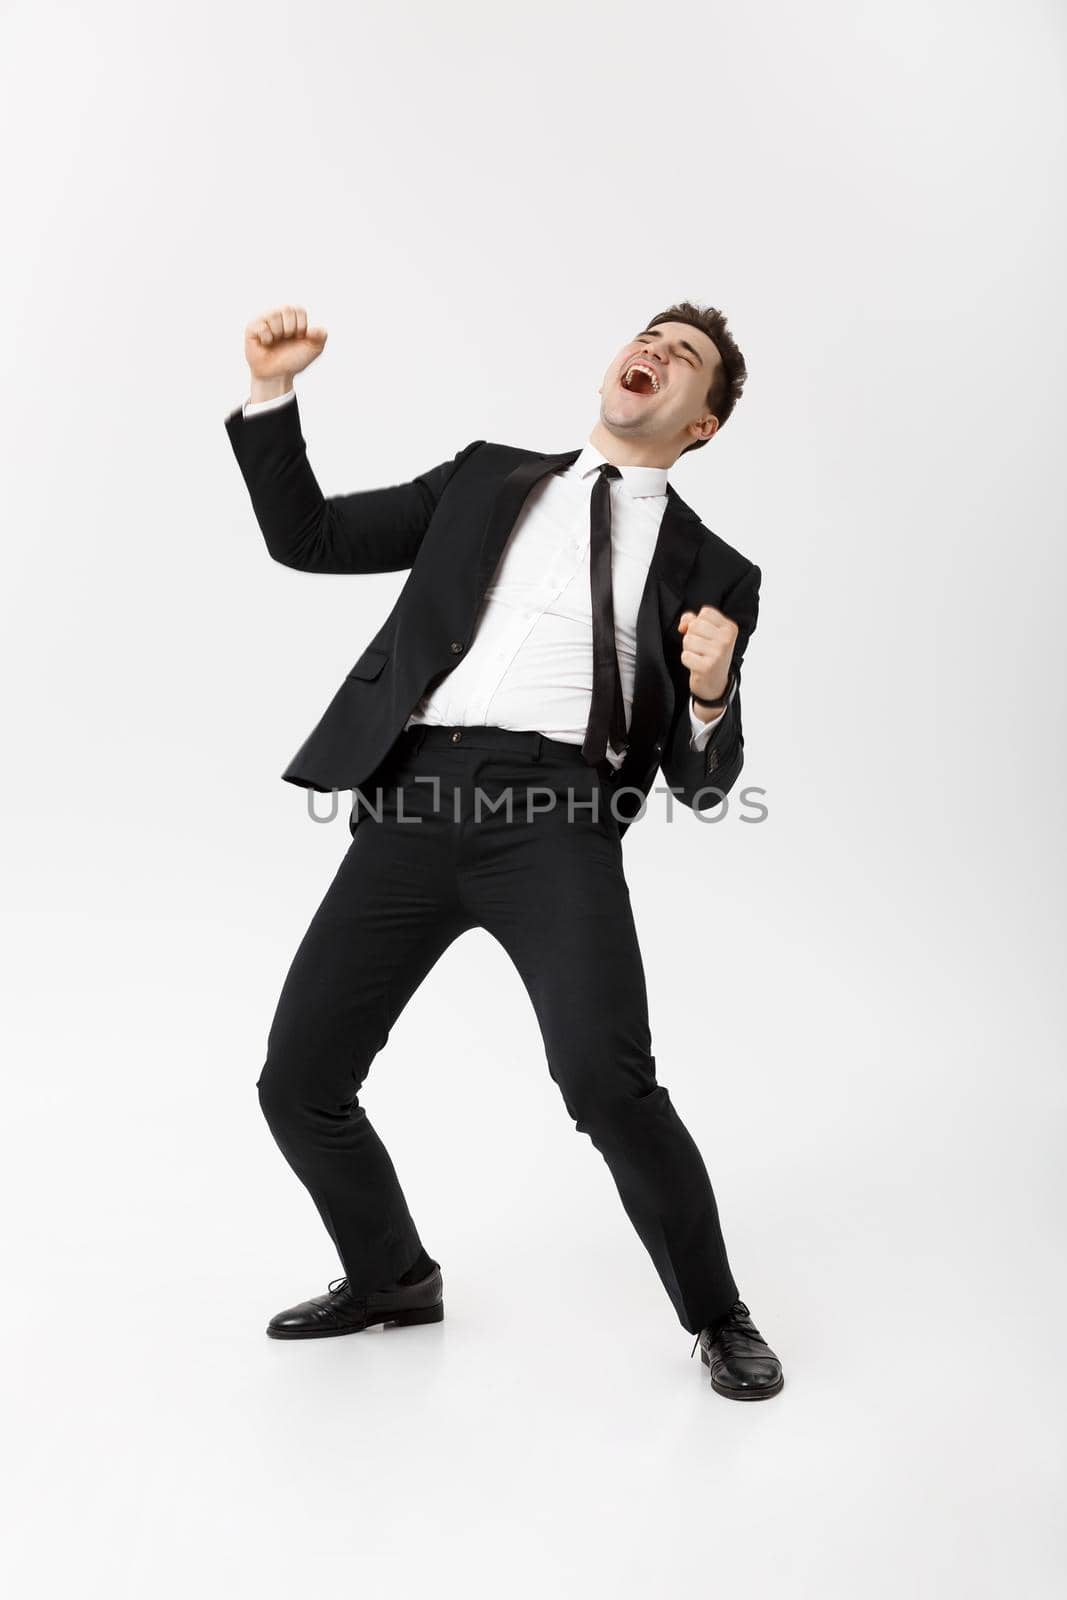 Business Concept - Handsome cheerful businessman showing hands in air over gray background